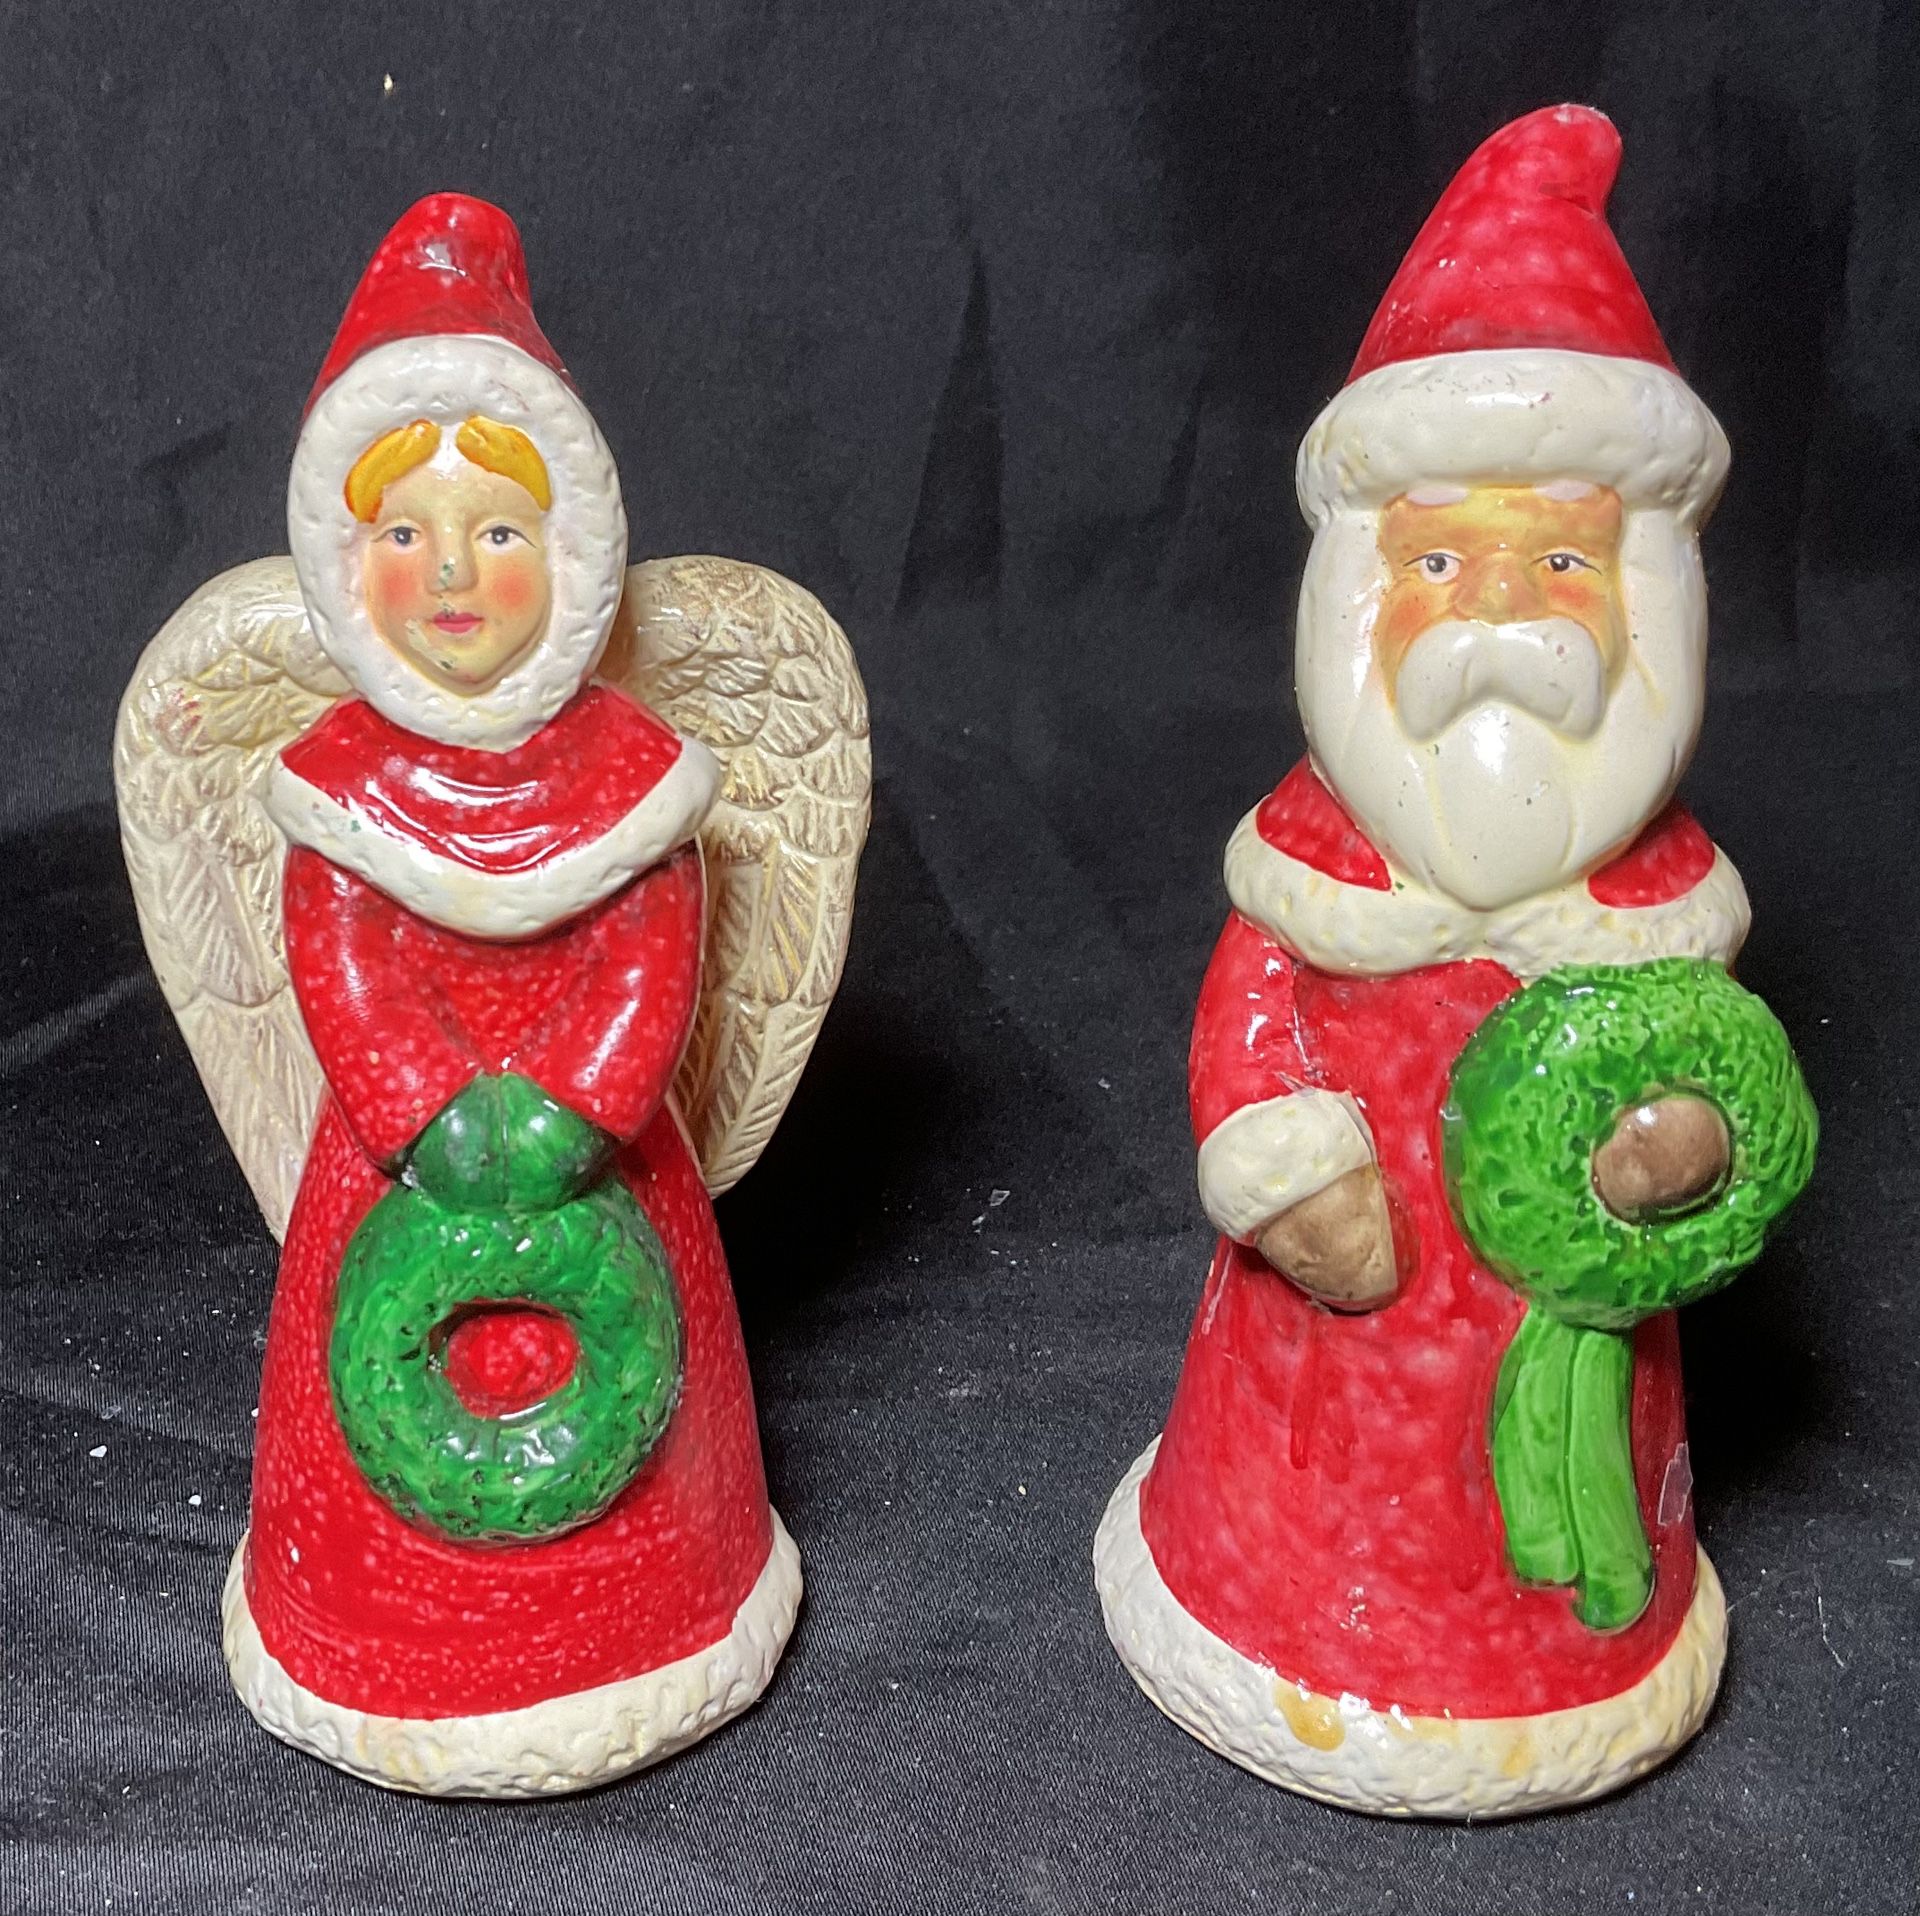 Vintage Christmas Figurine Set Of 2 Santa Claus And Angel With Wreath